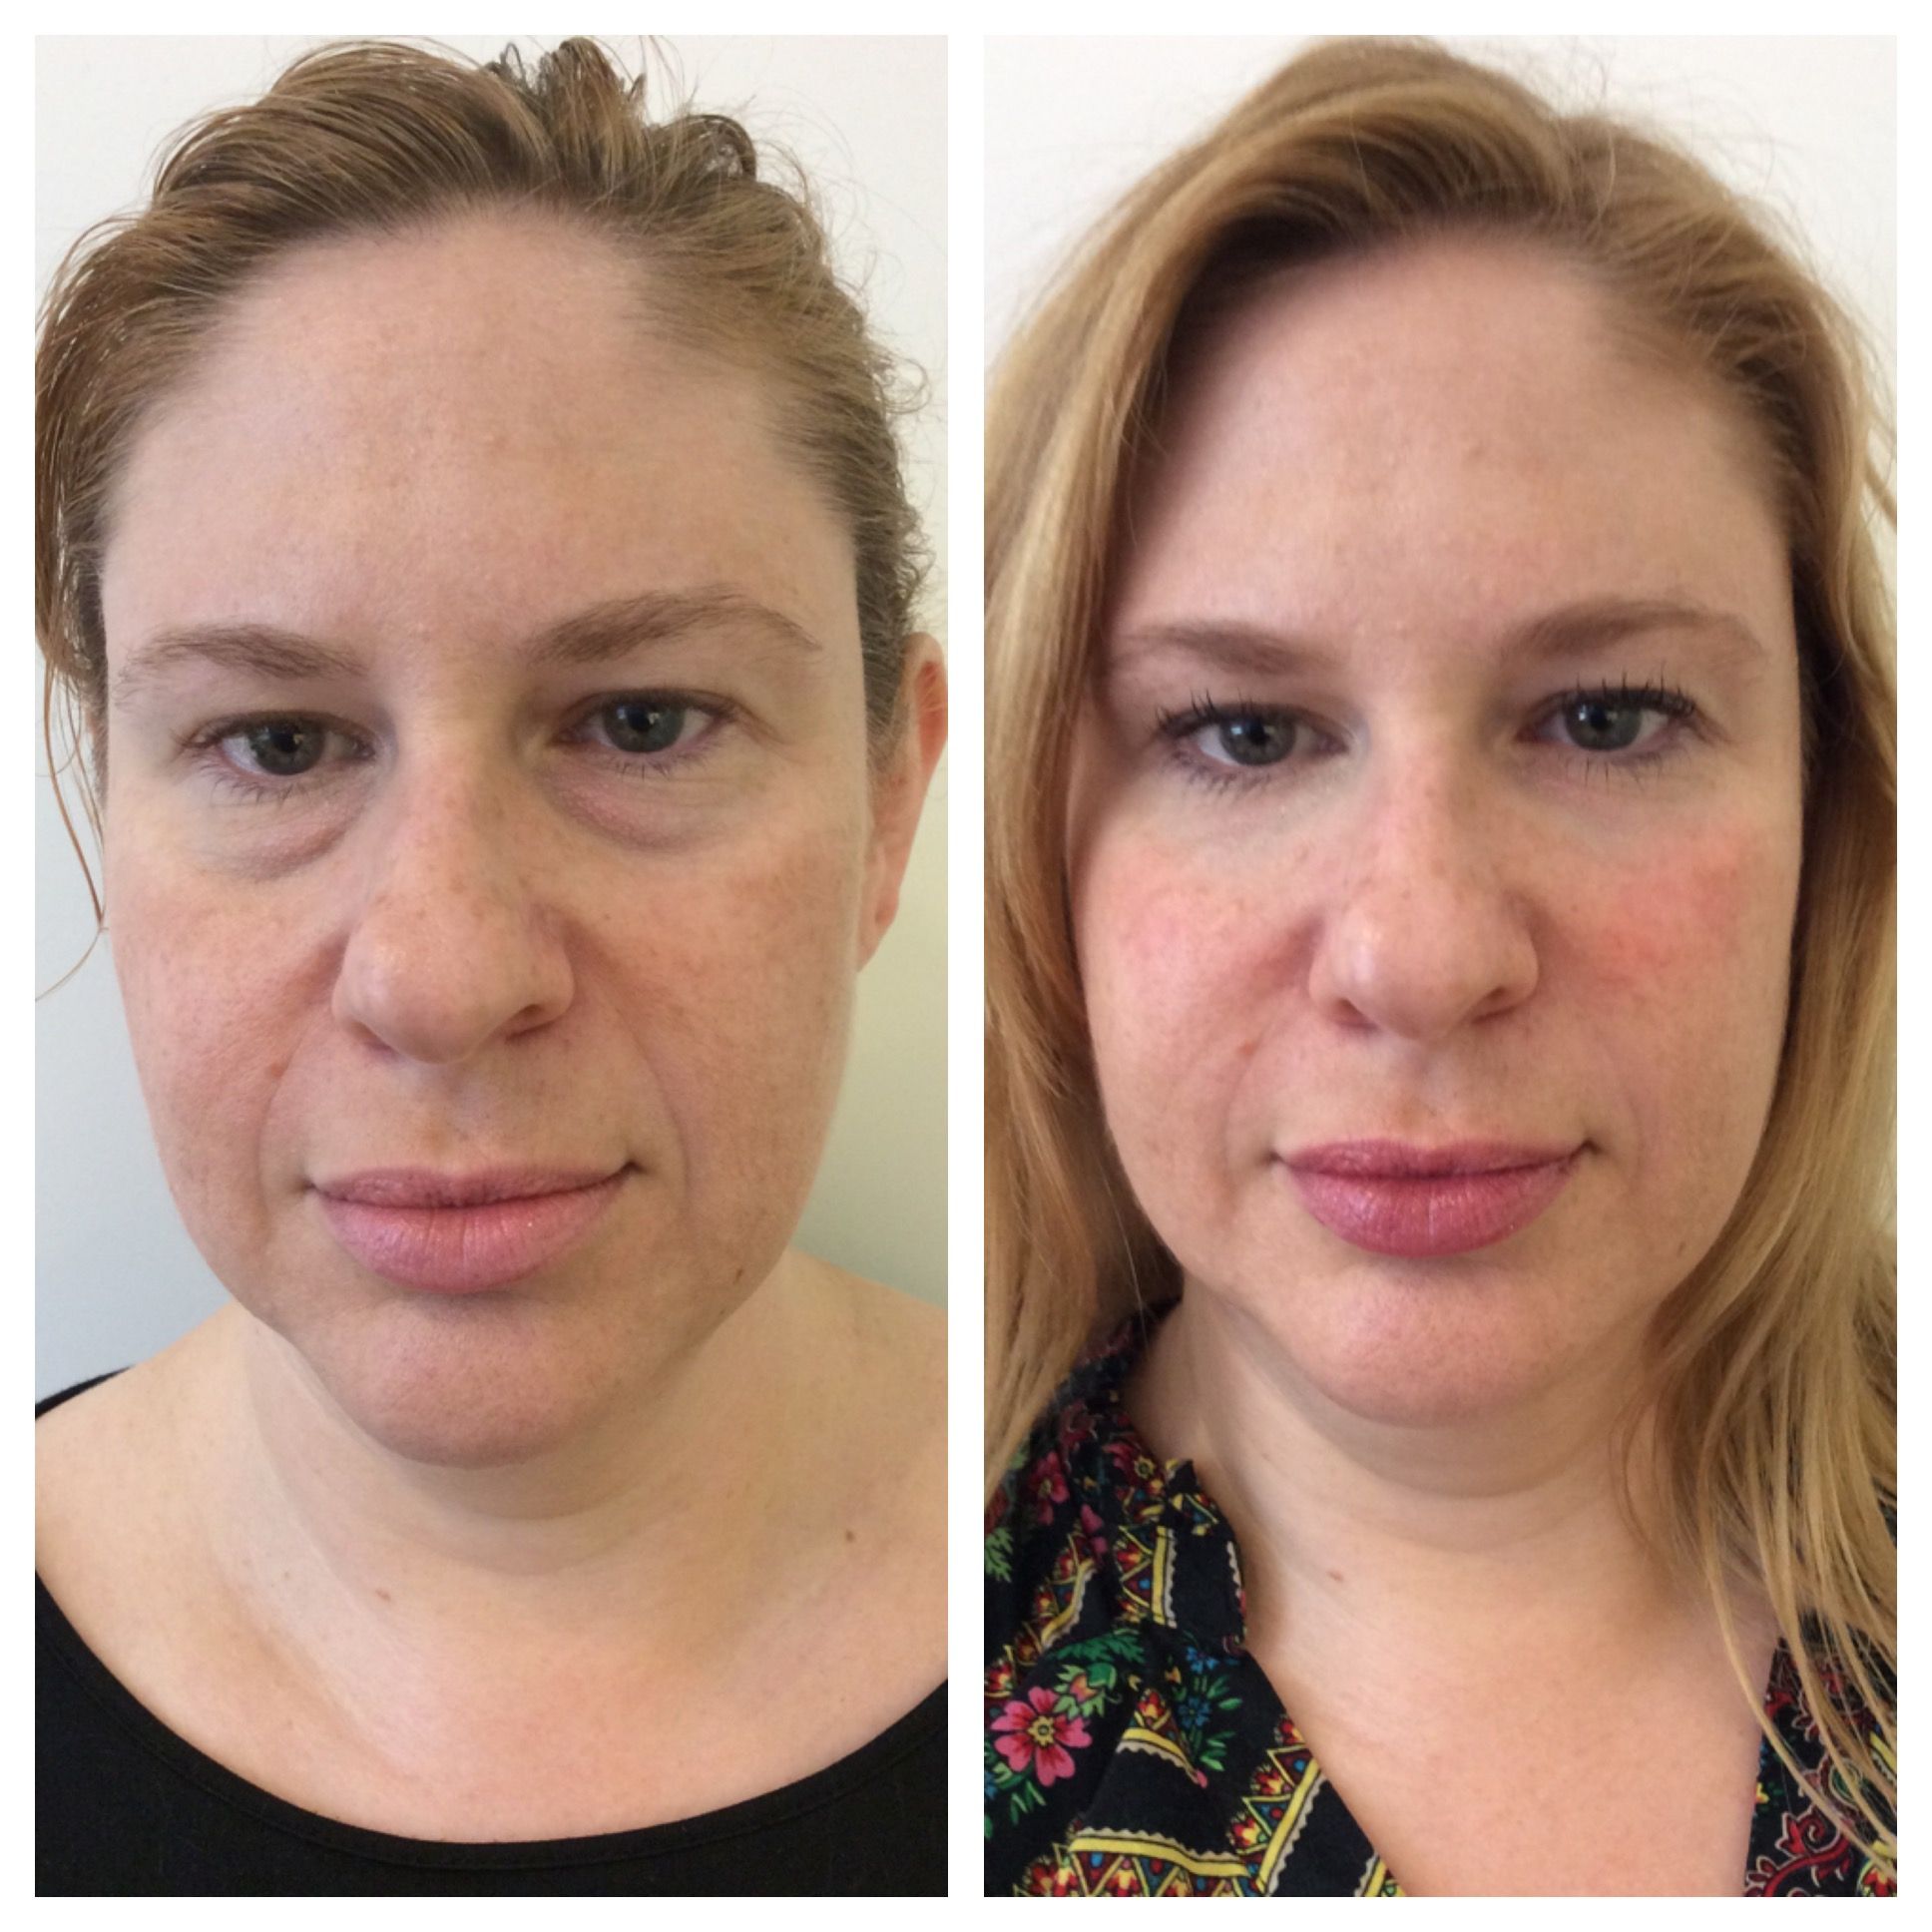 How to Care for your Non-surgical Rhinoplasty Results